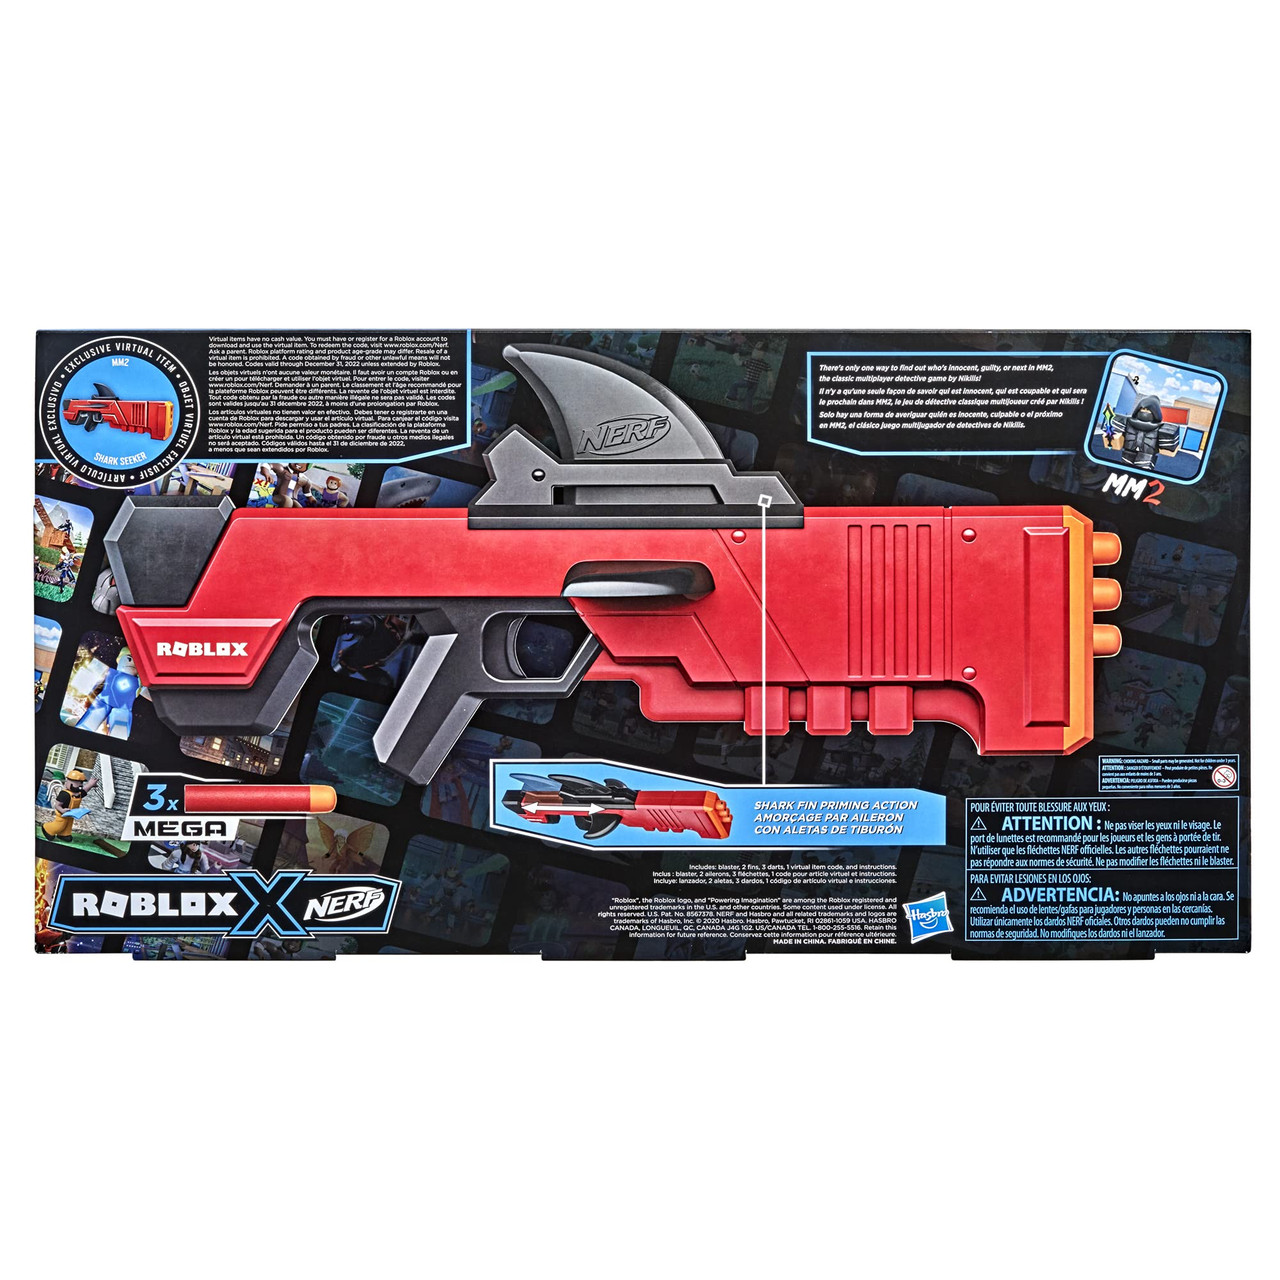 I managed to open the shark seeker, but I could use a little help  reassembling it : r/Nerf